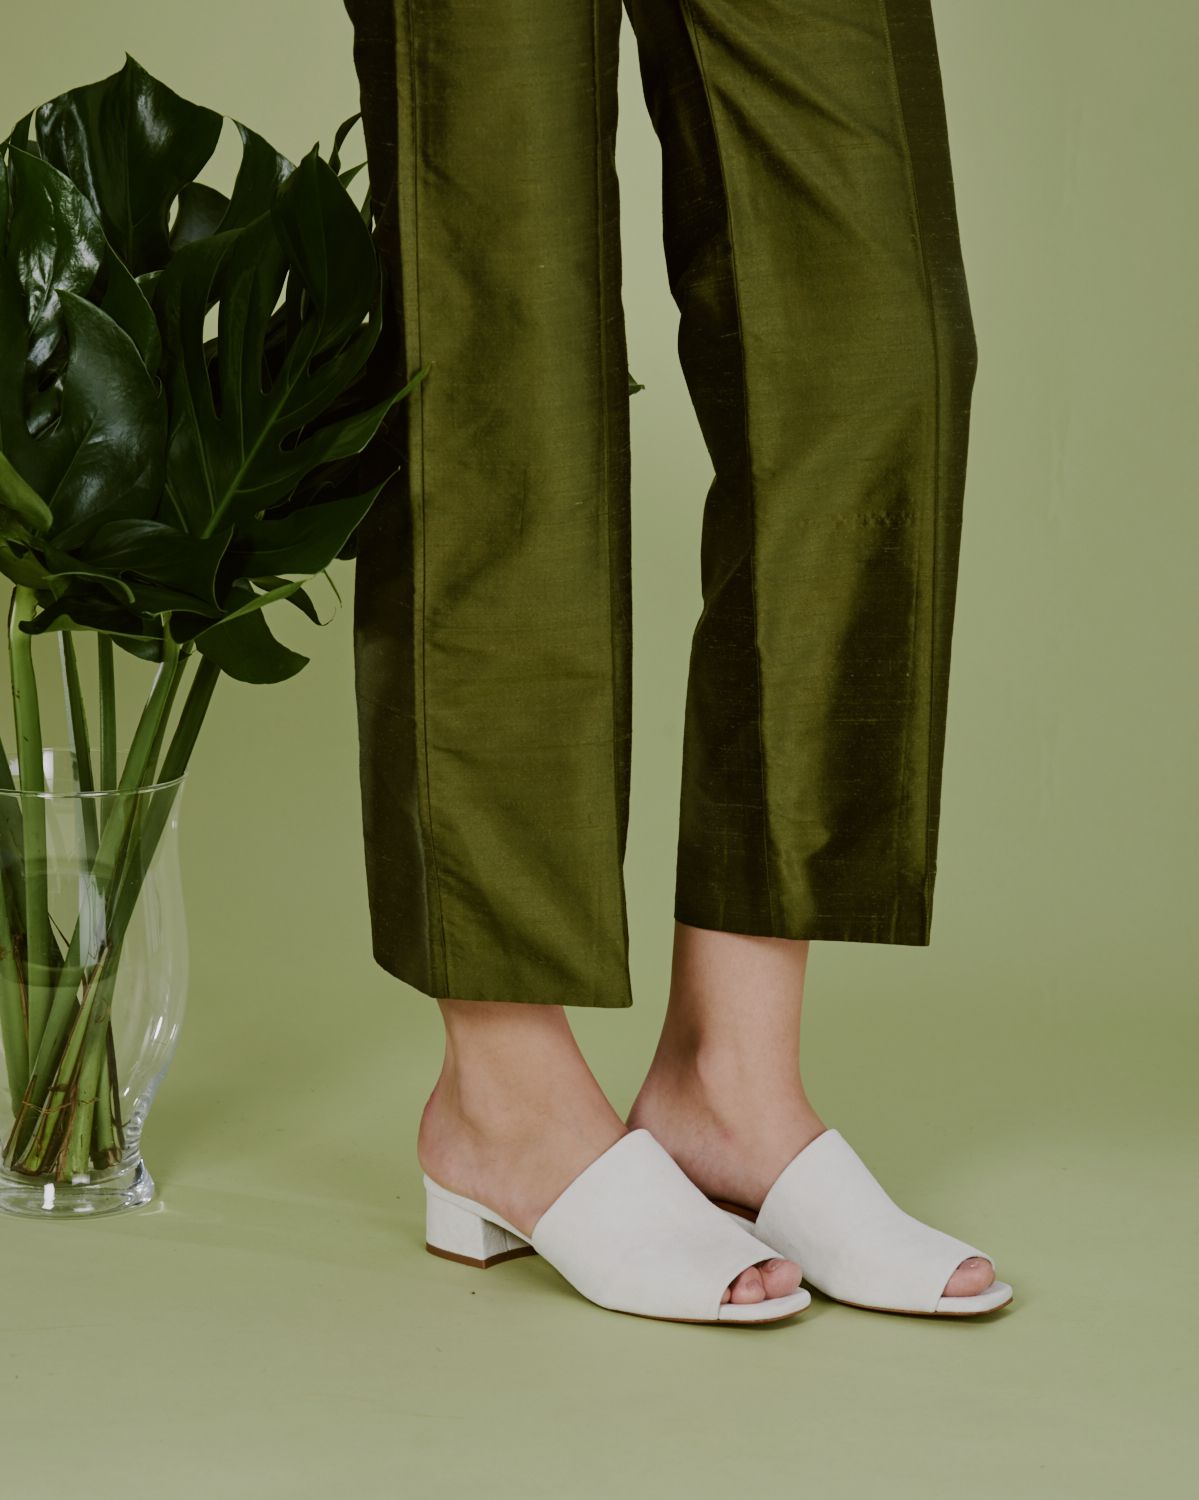 Model in green pants against green background in white slide on mules.